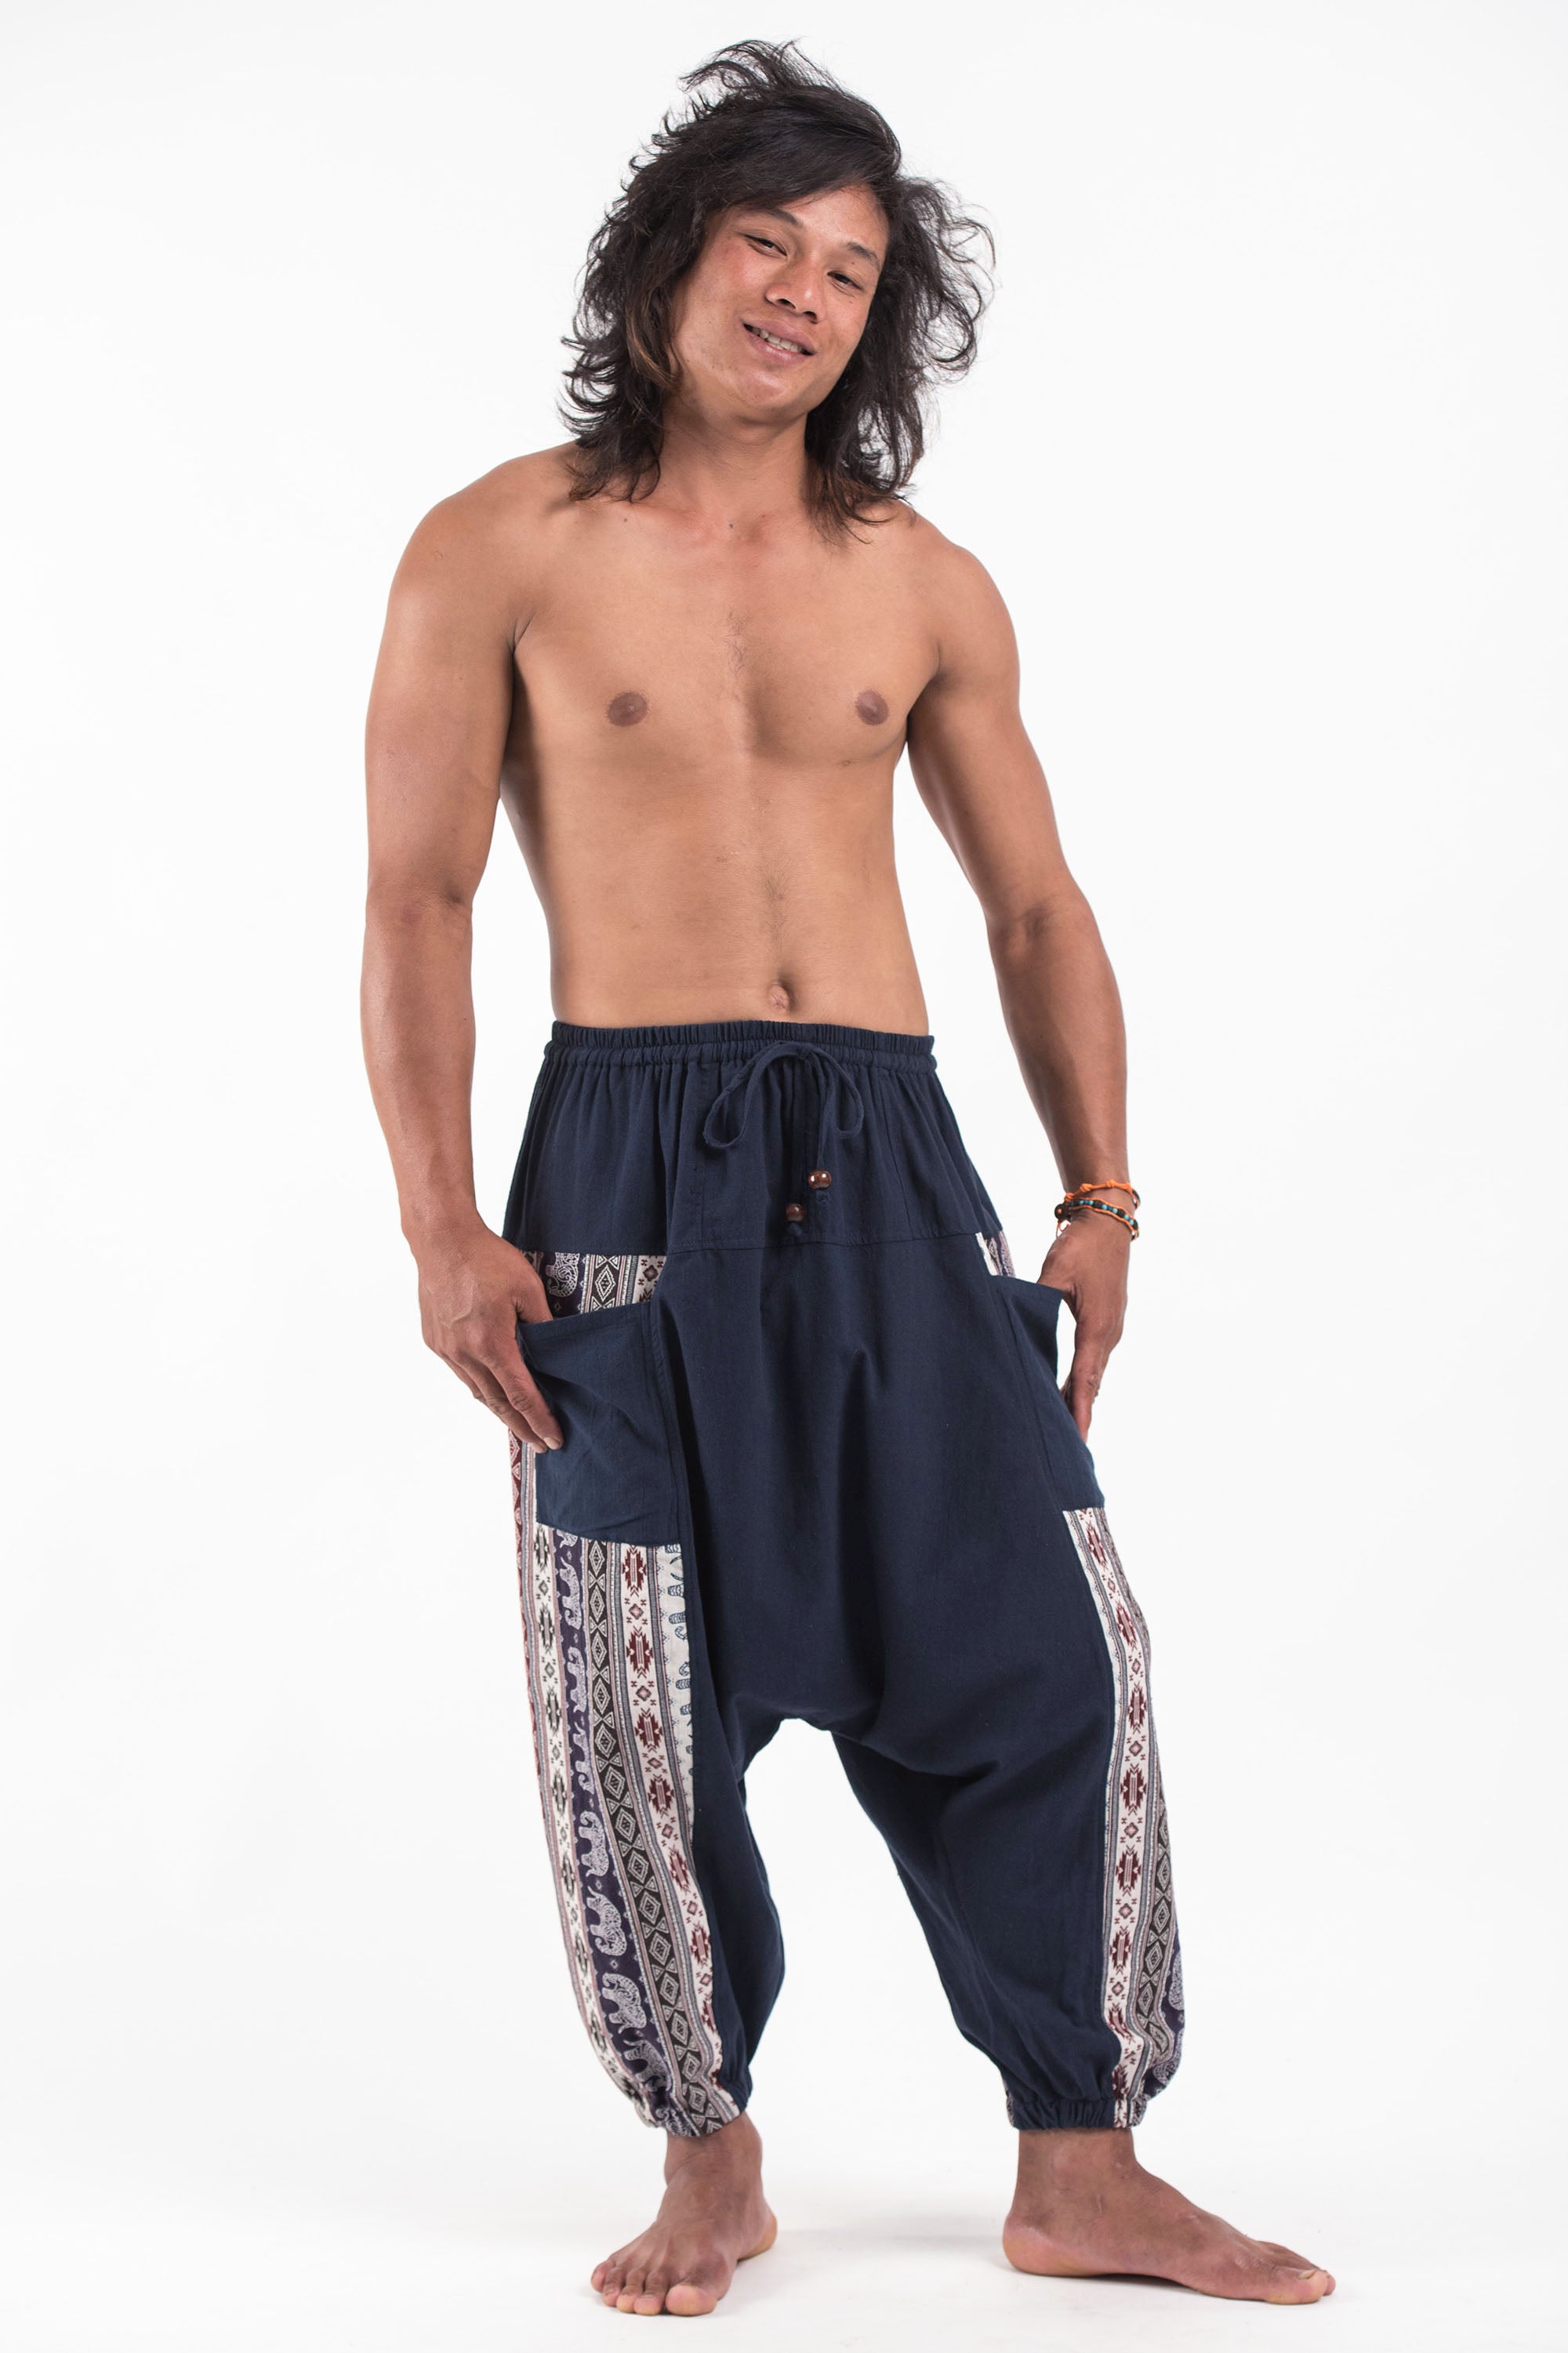 Elephant Aztec Cotton Men's Harem Pants in Navy. Free Shipping for